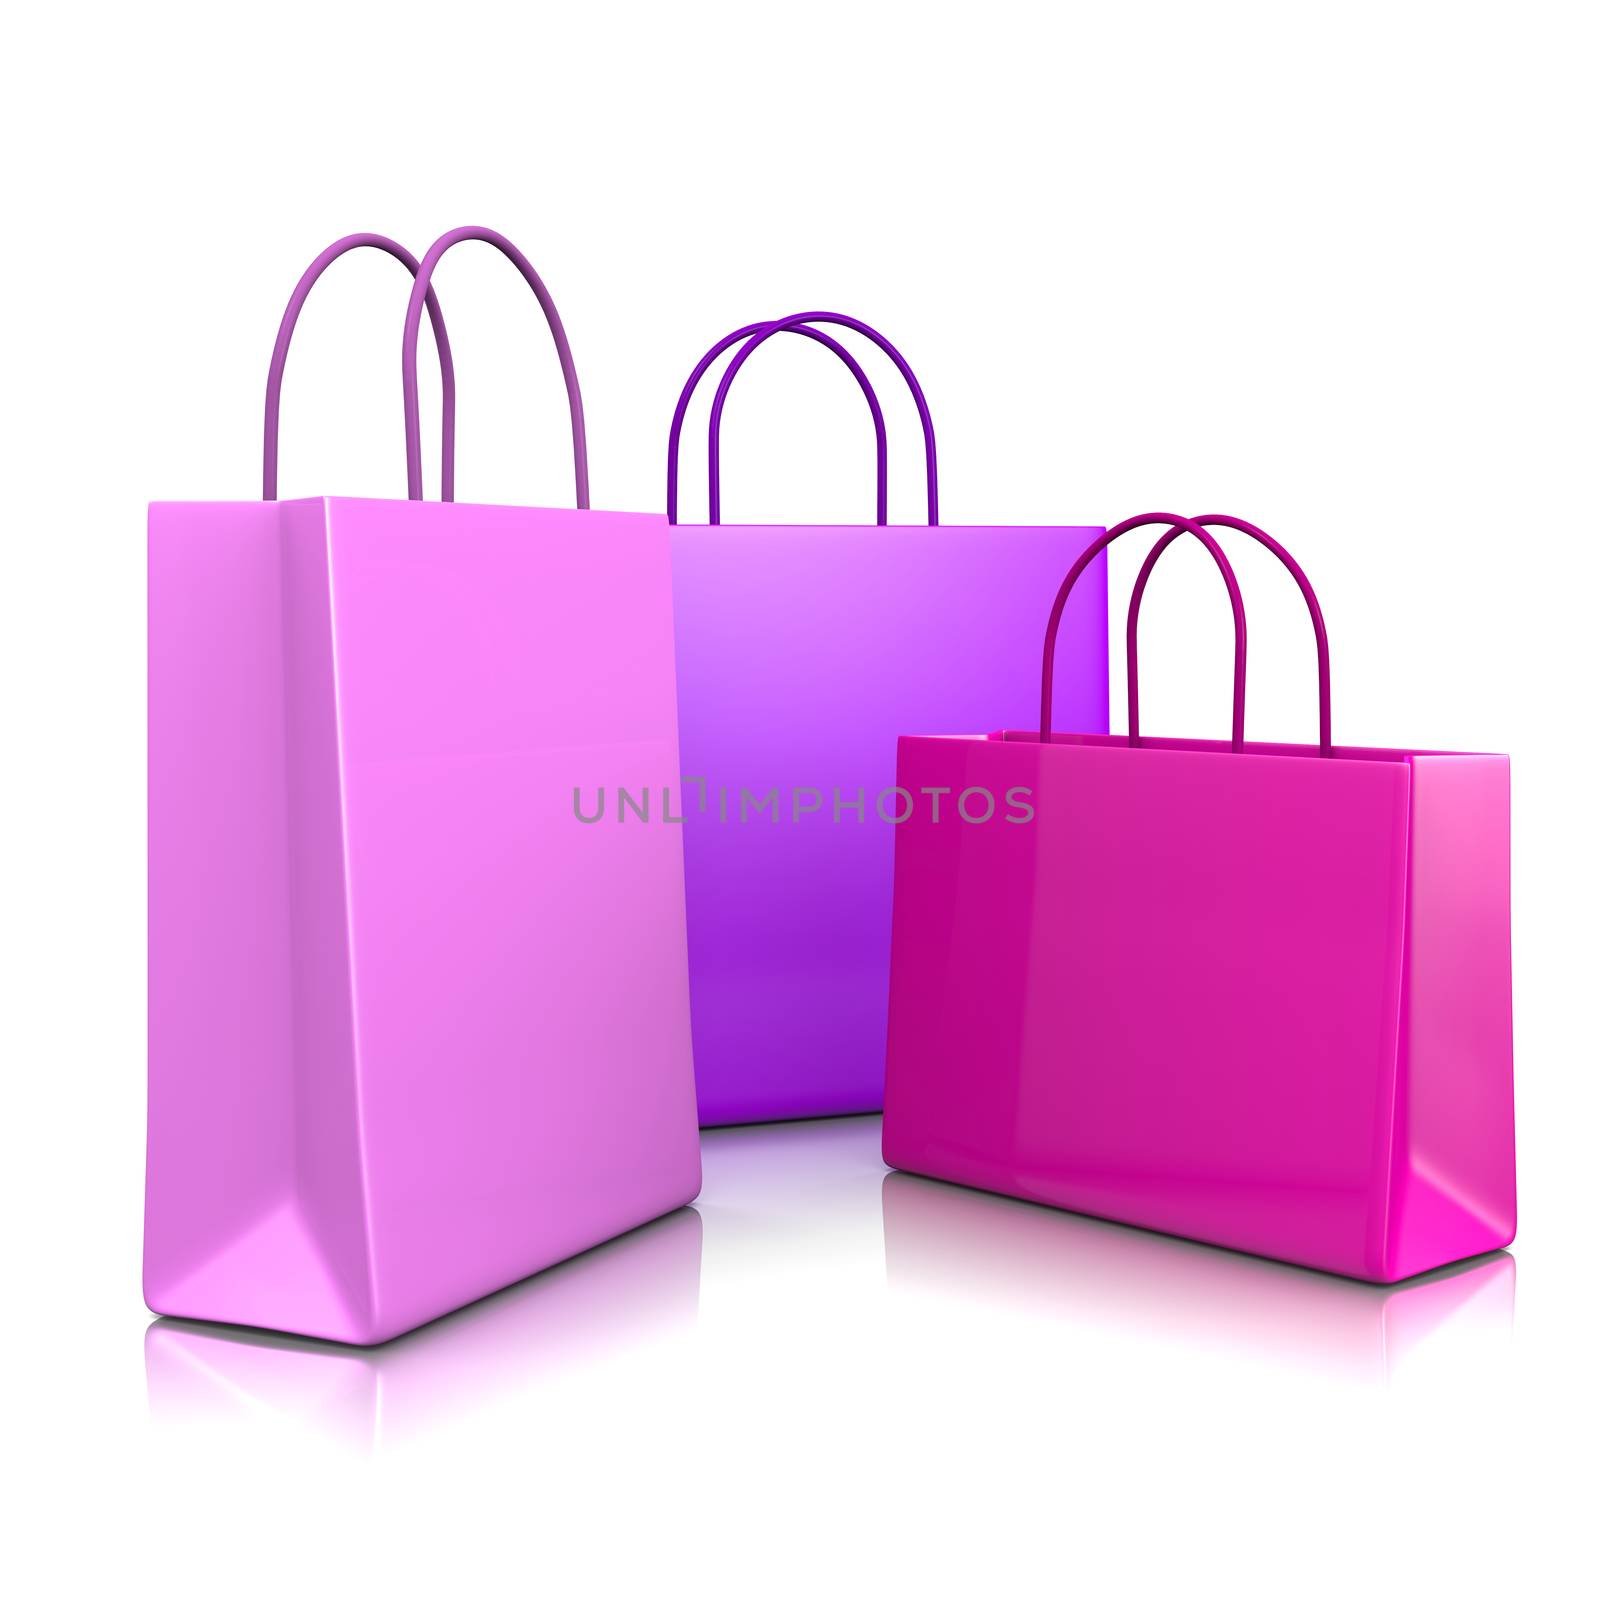 Pink and Violet Fashion Color Shopping Bags Isolated on White Background 3D Illustration